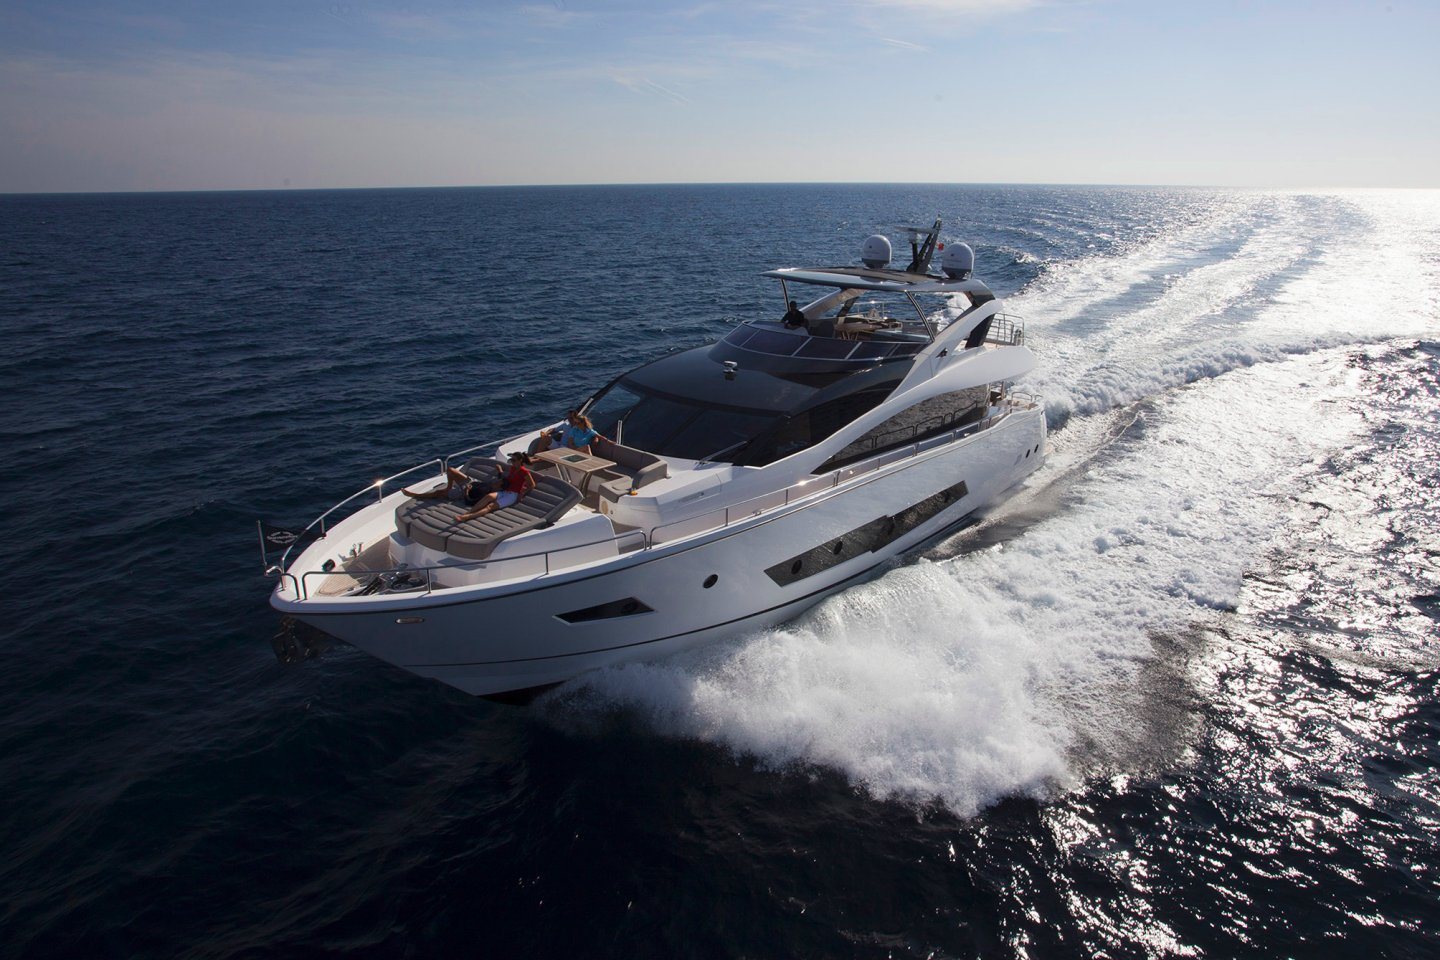 360 VR Virtual Tours of the Sunseeker 86 Yacht